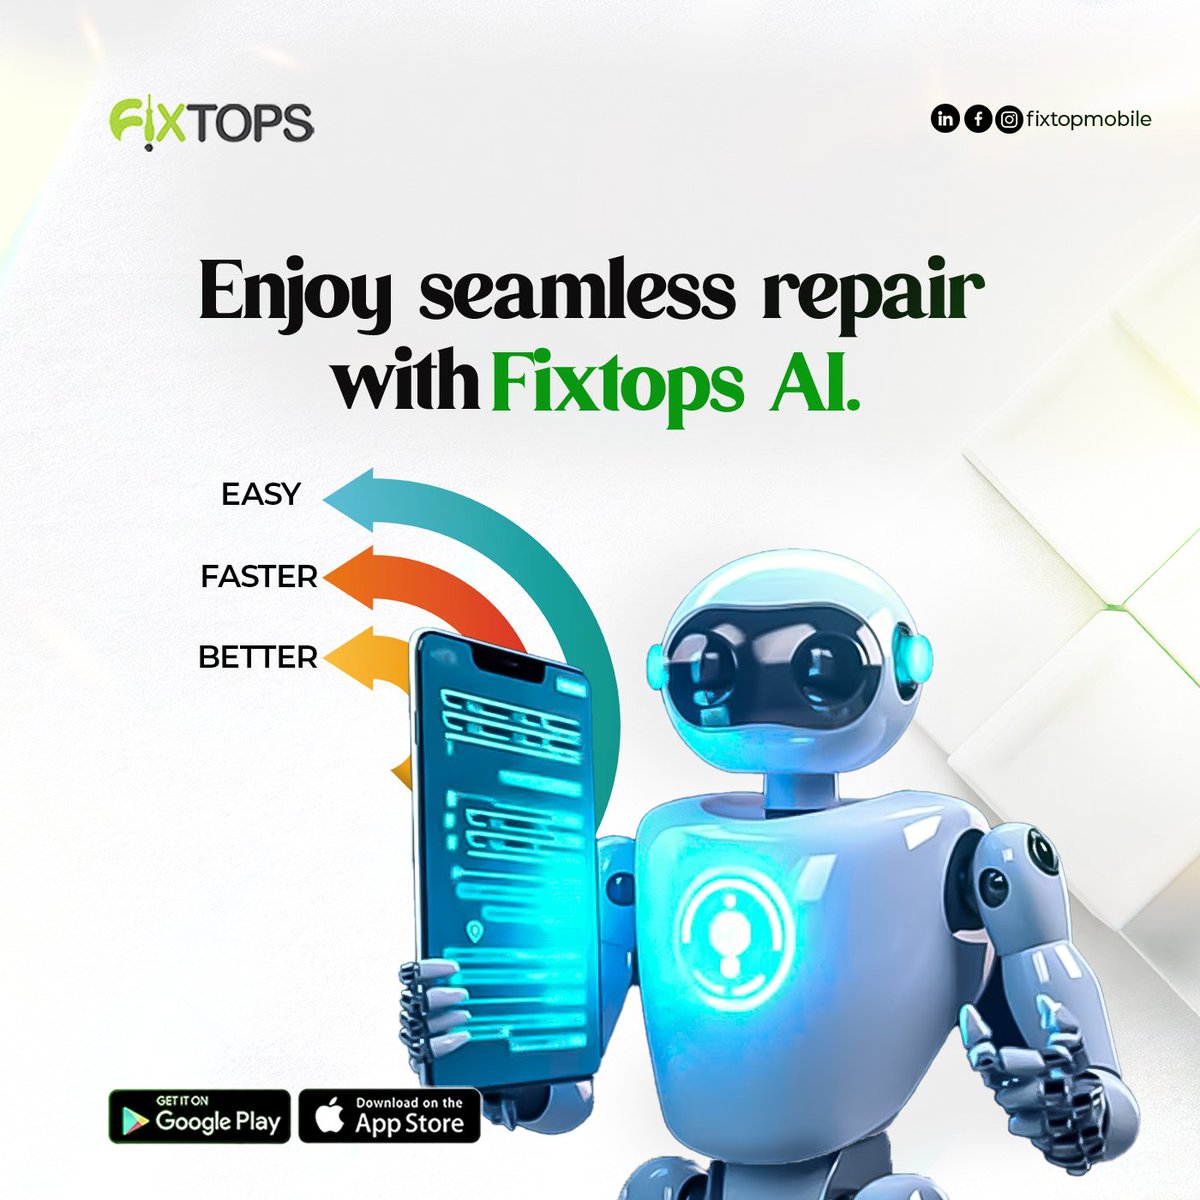 Enjoy seamless repair here on Fixtops AI 💯🦾
.
.
.
.
fixtops AI coming soon...
#Fixtops2.0 #AIRepair #Efficiency #Techsolution #Techrepair #WeComeToYou  #SameDayTechRepair #TechGlitches #AIAnalysis #Troubleshooting #TechSolutions  #DigitalSavvy #SmartTech #AIAssistance